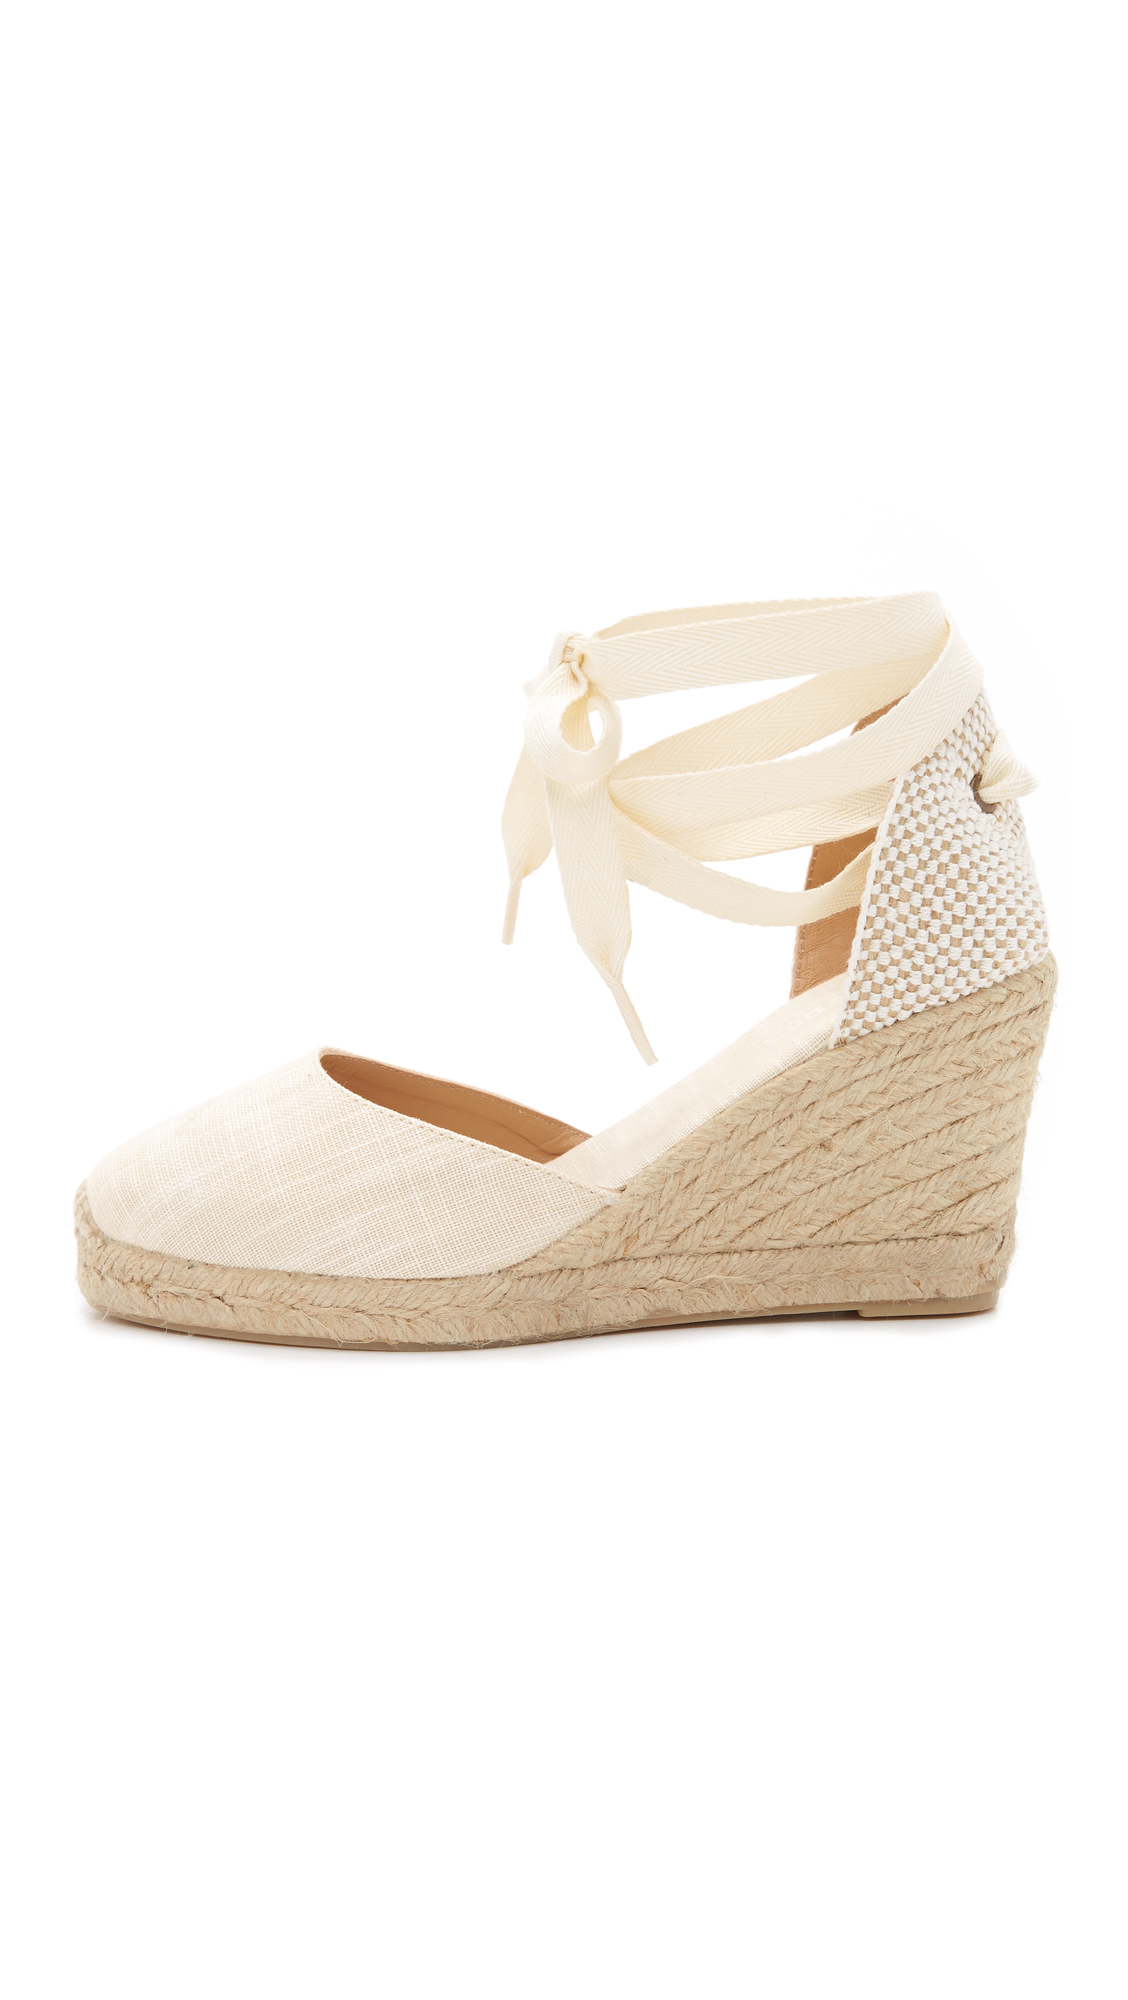 Lyst - Soludos Tall Wedge Espadrilles in Natural